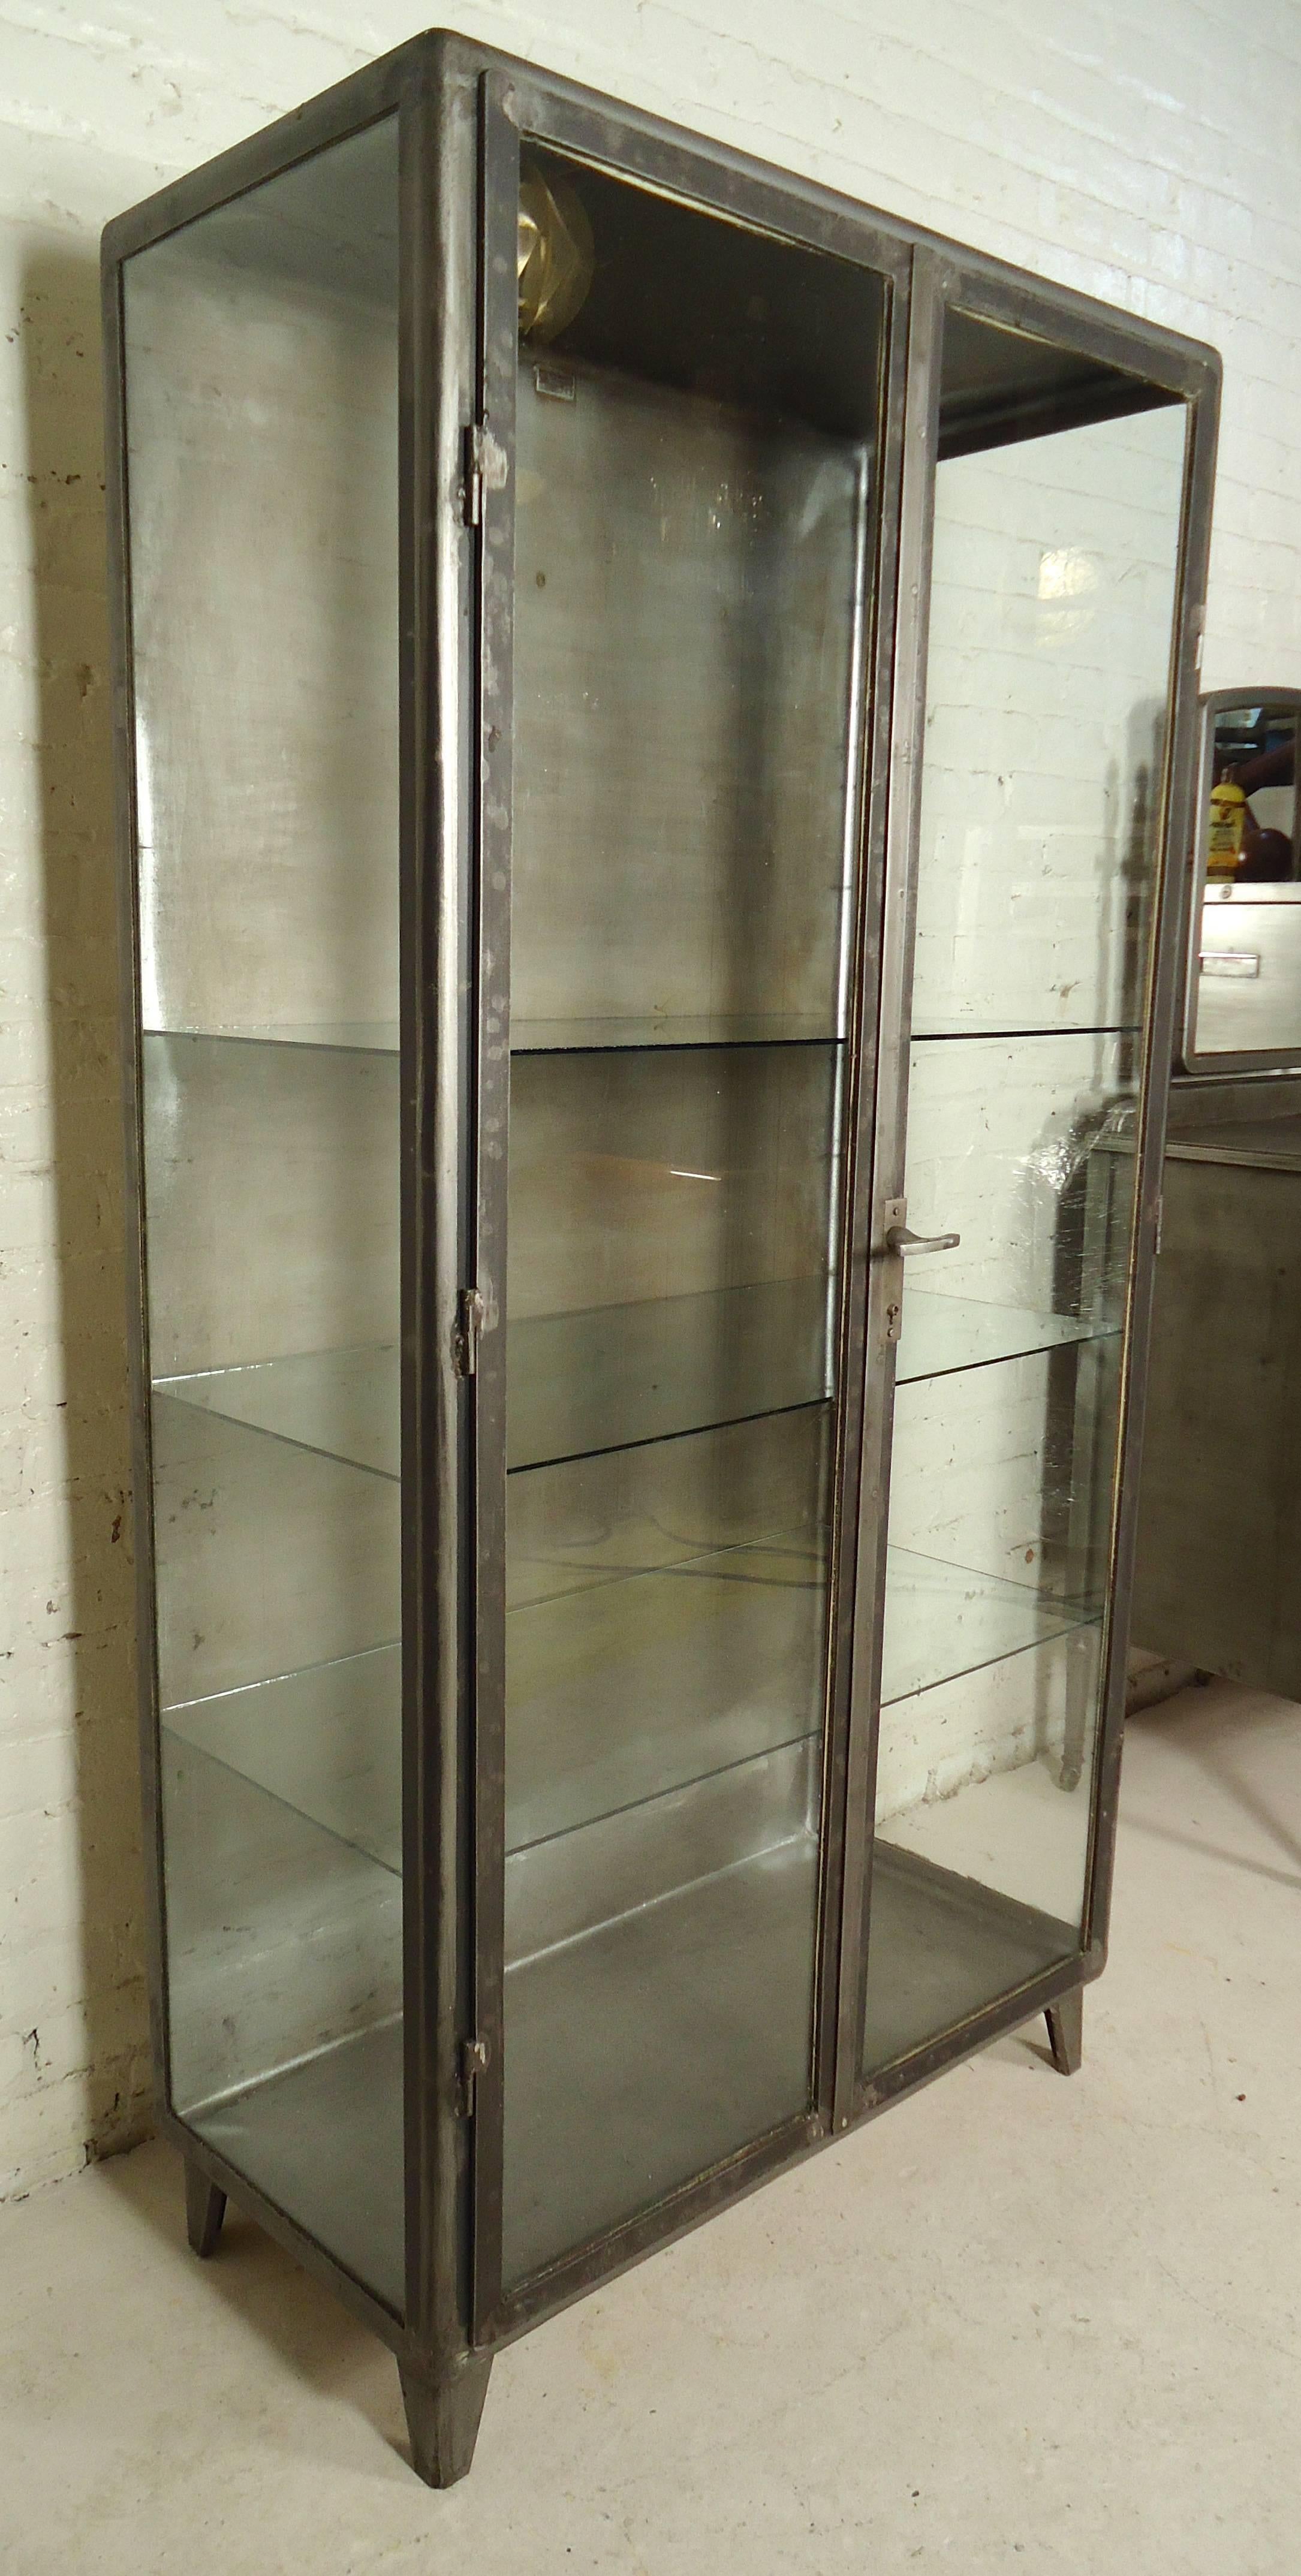 Pair of refinished metal cabinets with three glass sides and glass shelving. Each cabinet can accommodate nine shelves; handle locking system, refinished in a bare metal style finish. One cabinet features coat hooks.

(Please confirm item location